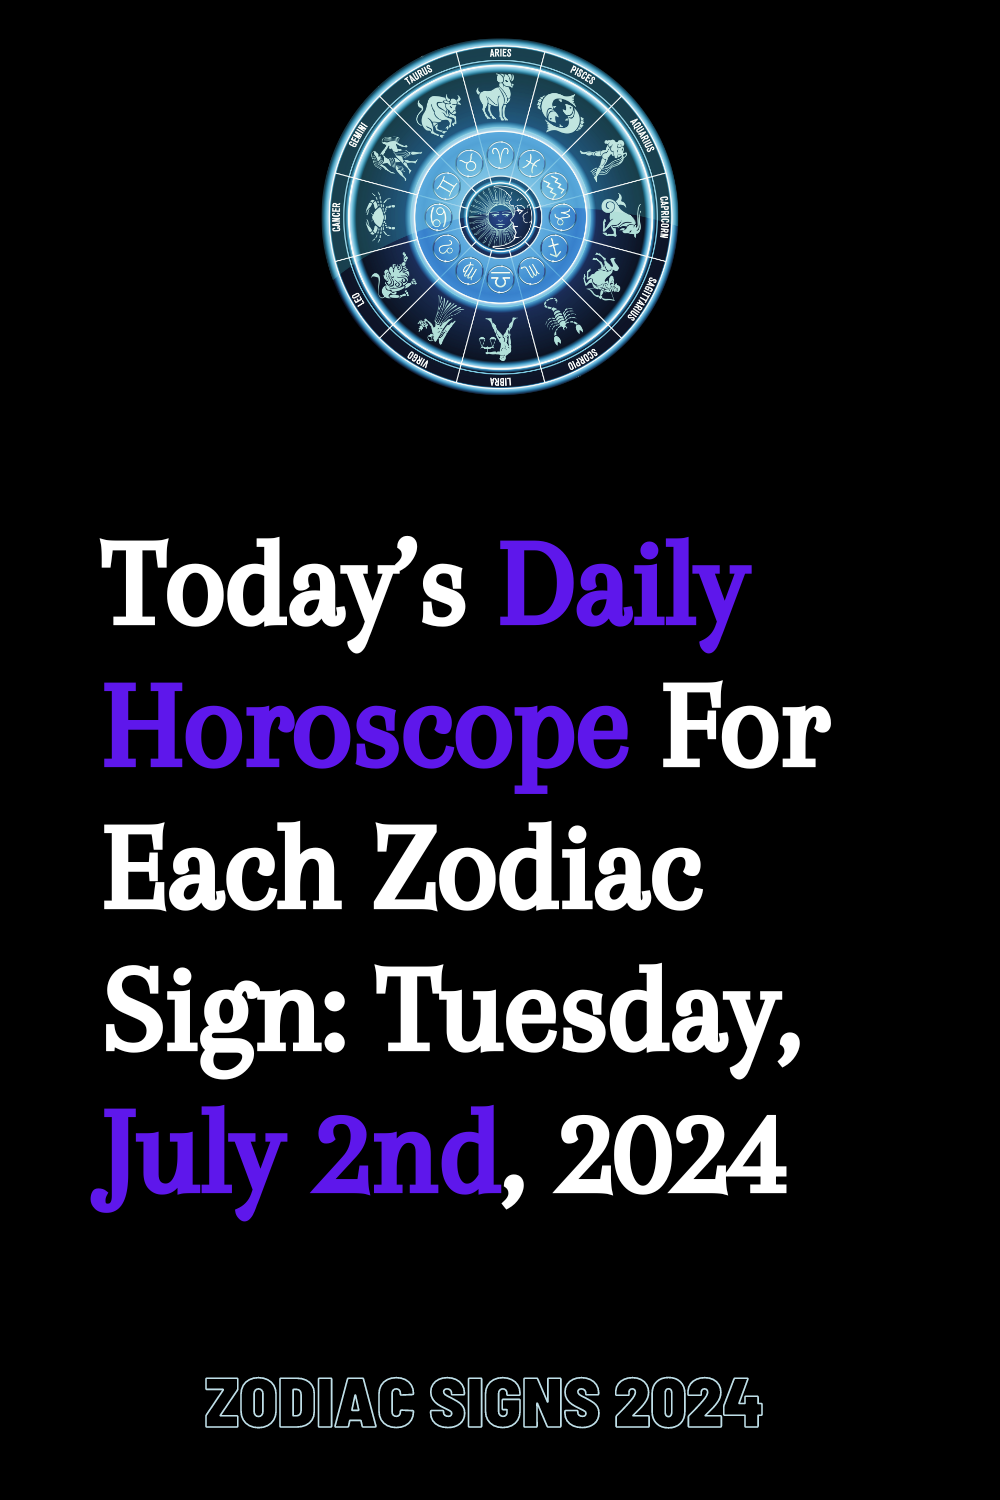 Today’s Daily Horoscope For Each Zodiac Sign: Tuesday, July 2nd, 2024